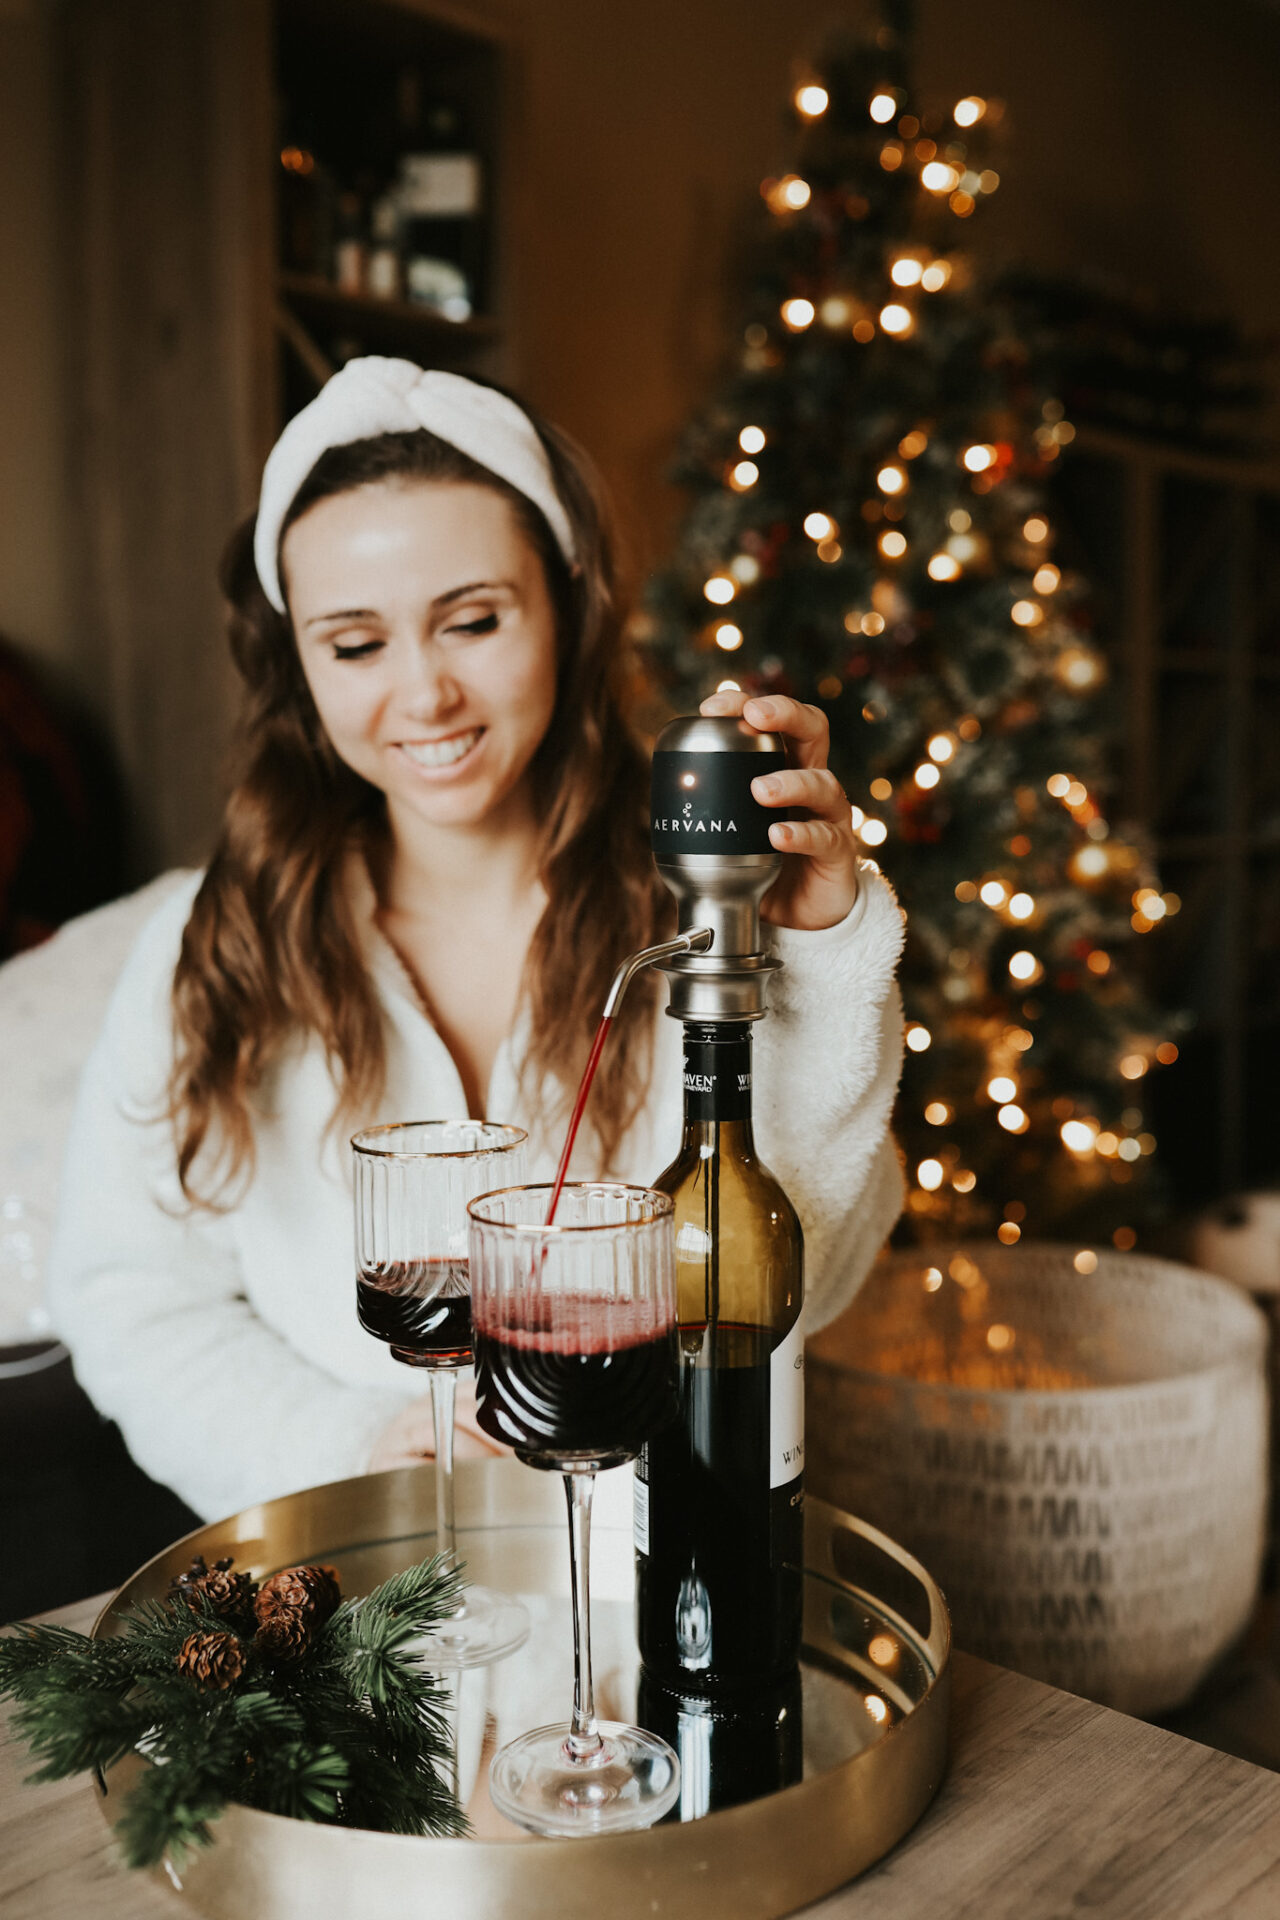 Aervana wine aerator on a table with Paige pressing the button to pour into a wine glass